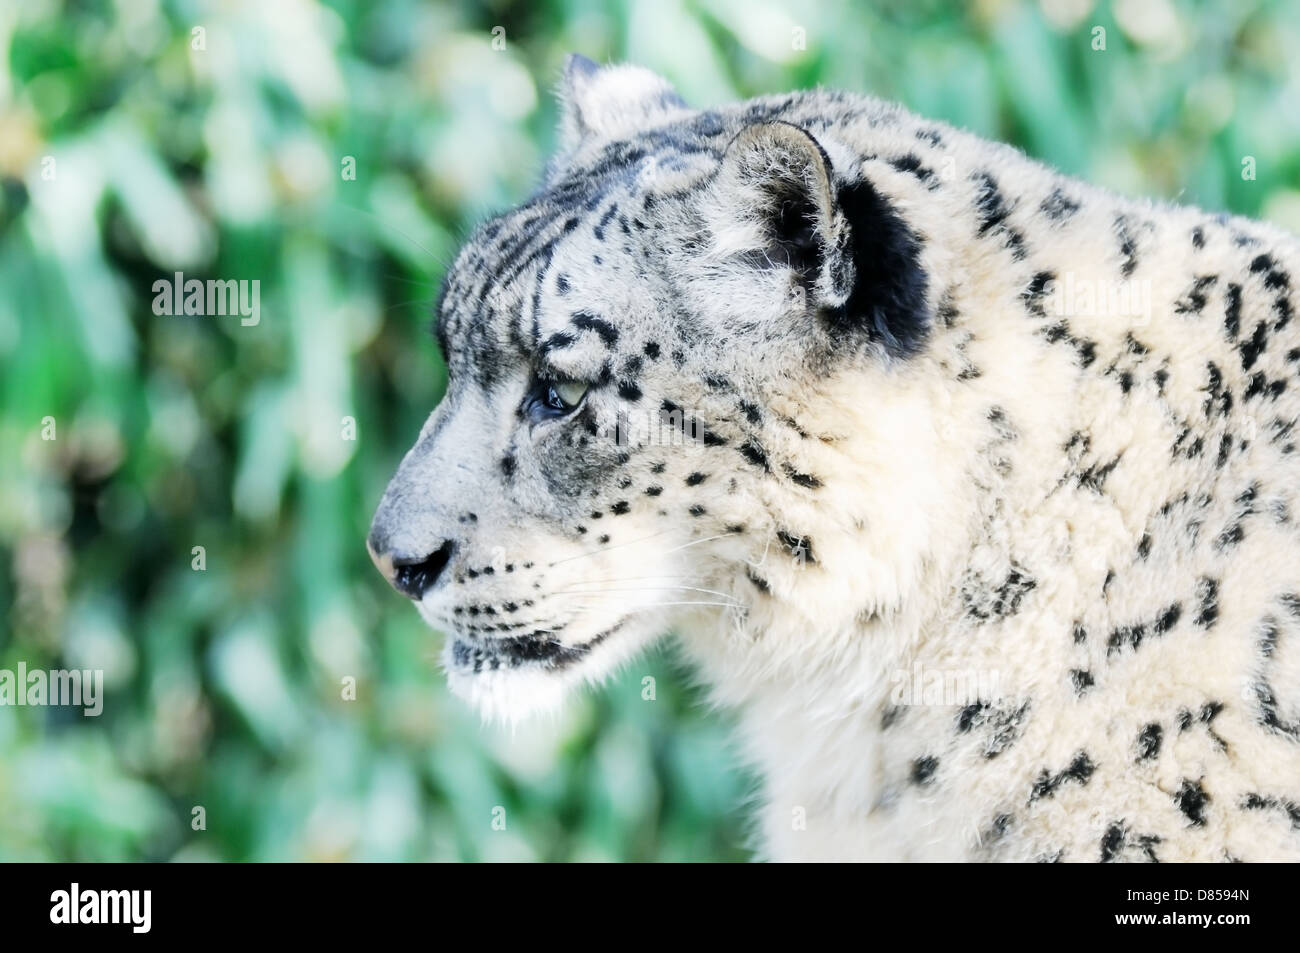 Closeup profile of snow leopard face with fur detail Stock Photo